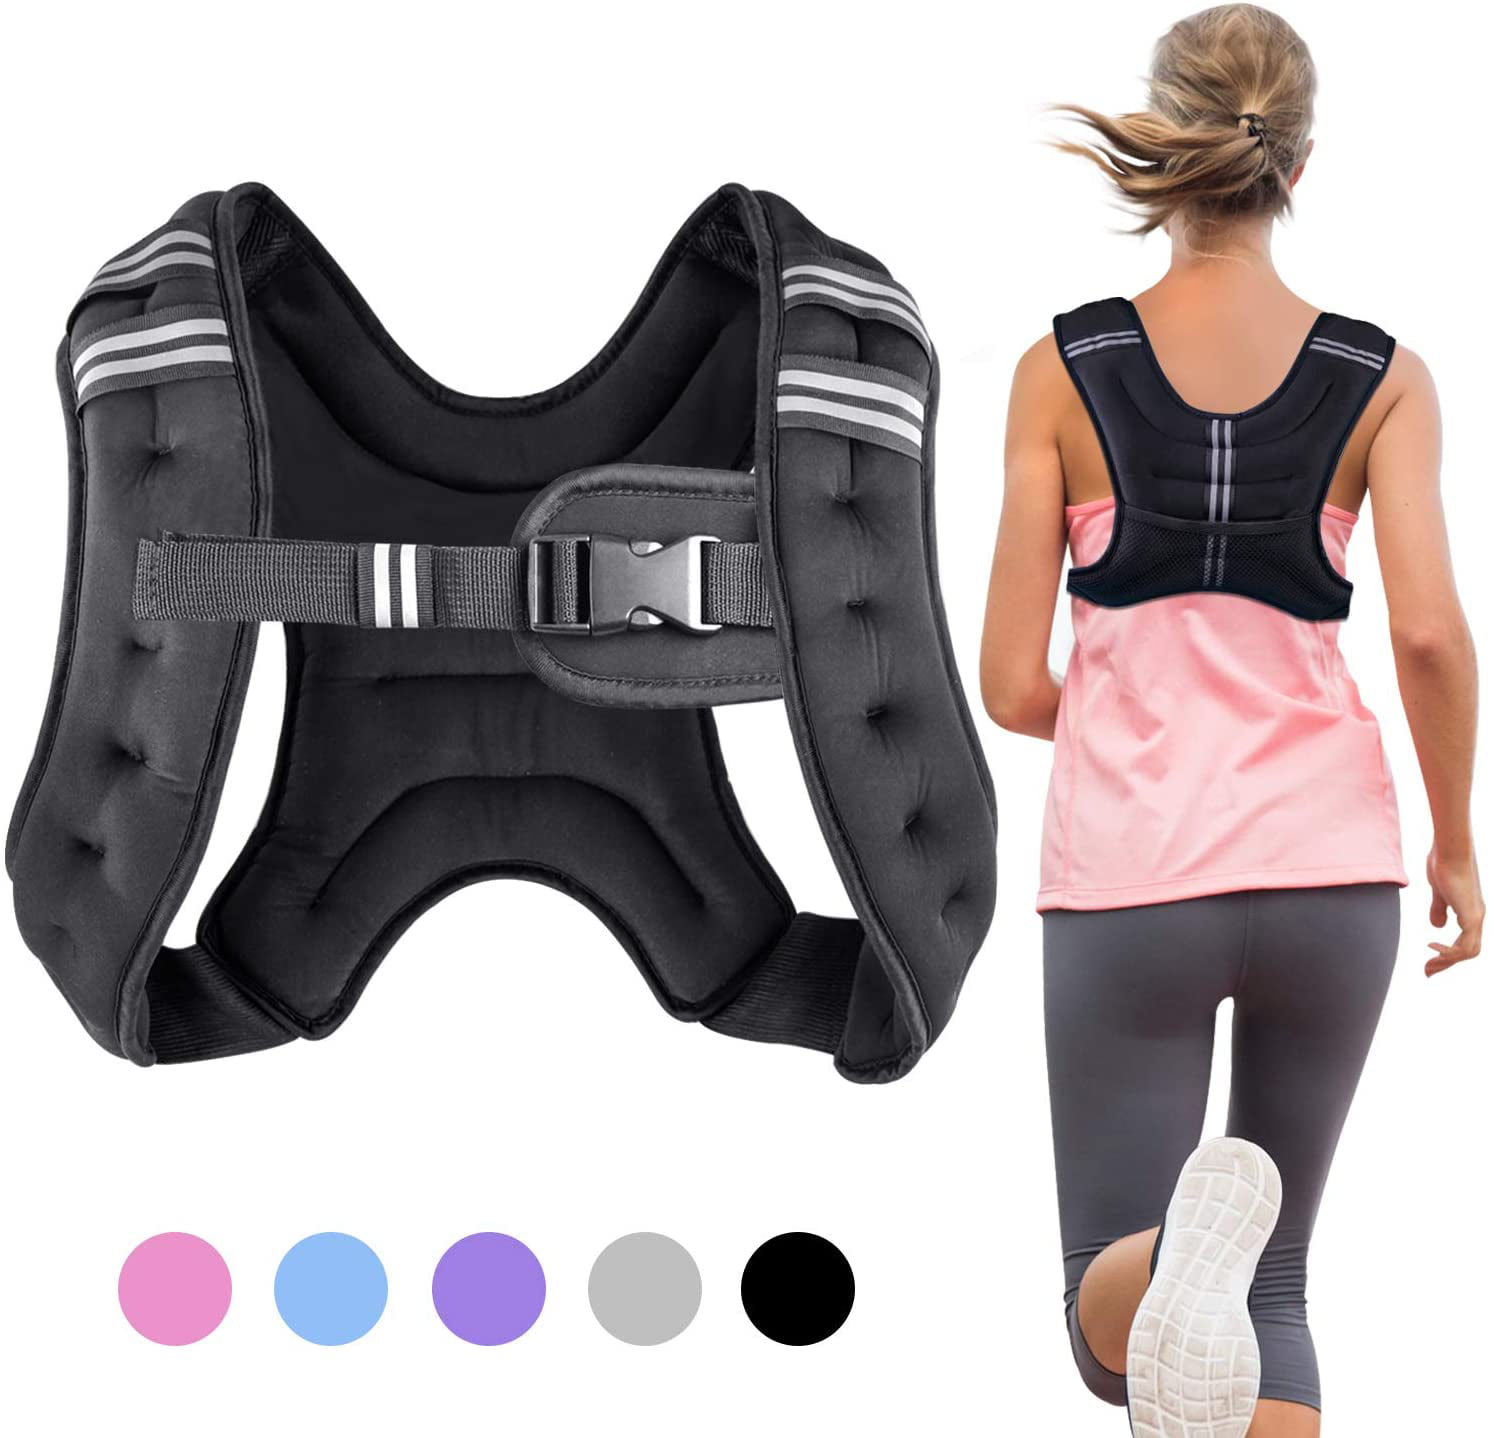 16KG WEIGHTED WEIGHT VEST ADJUSTABLE MMA GYM TRAINING EXERCISE SPORT FITNESS 